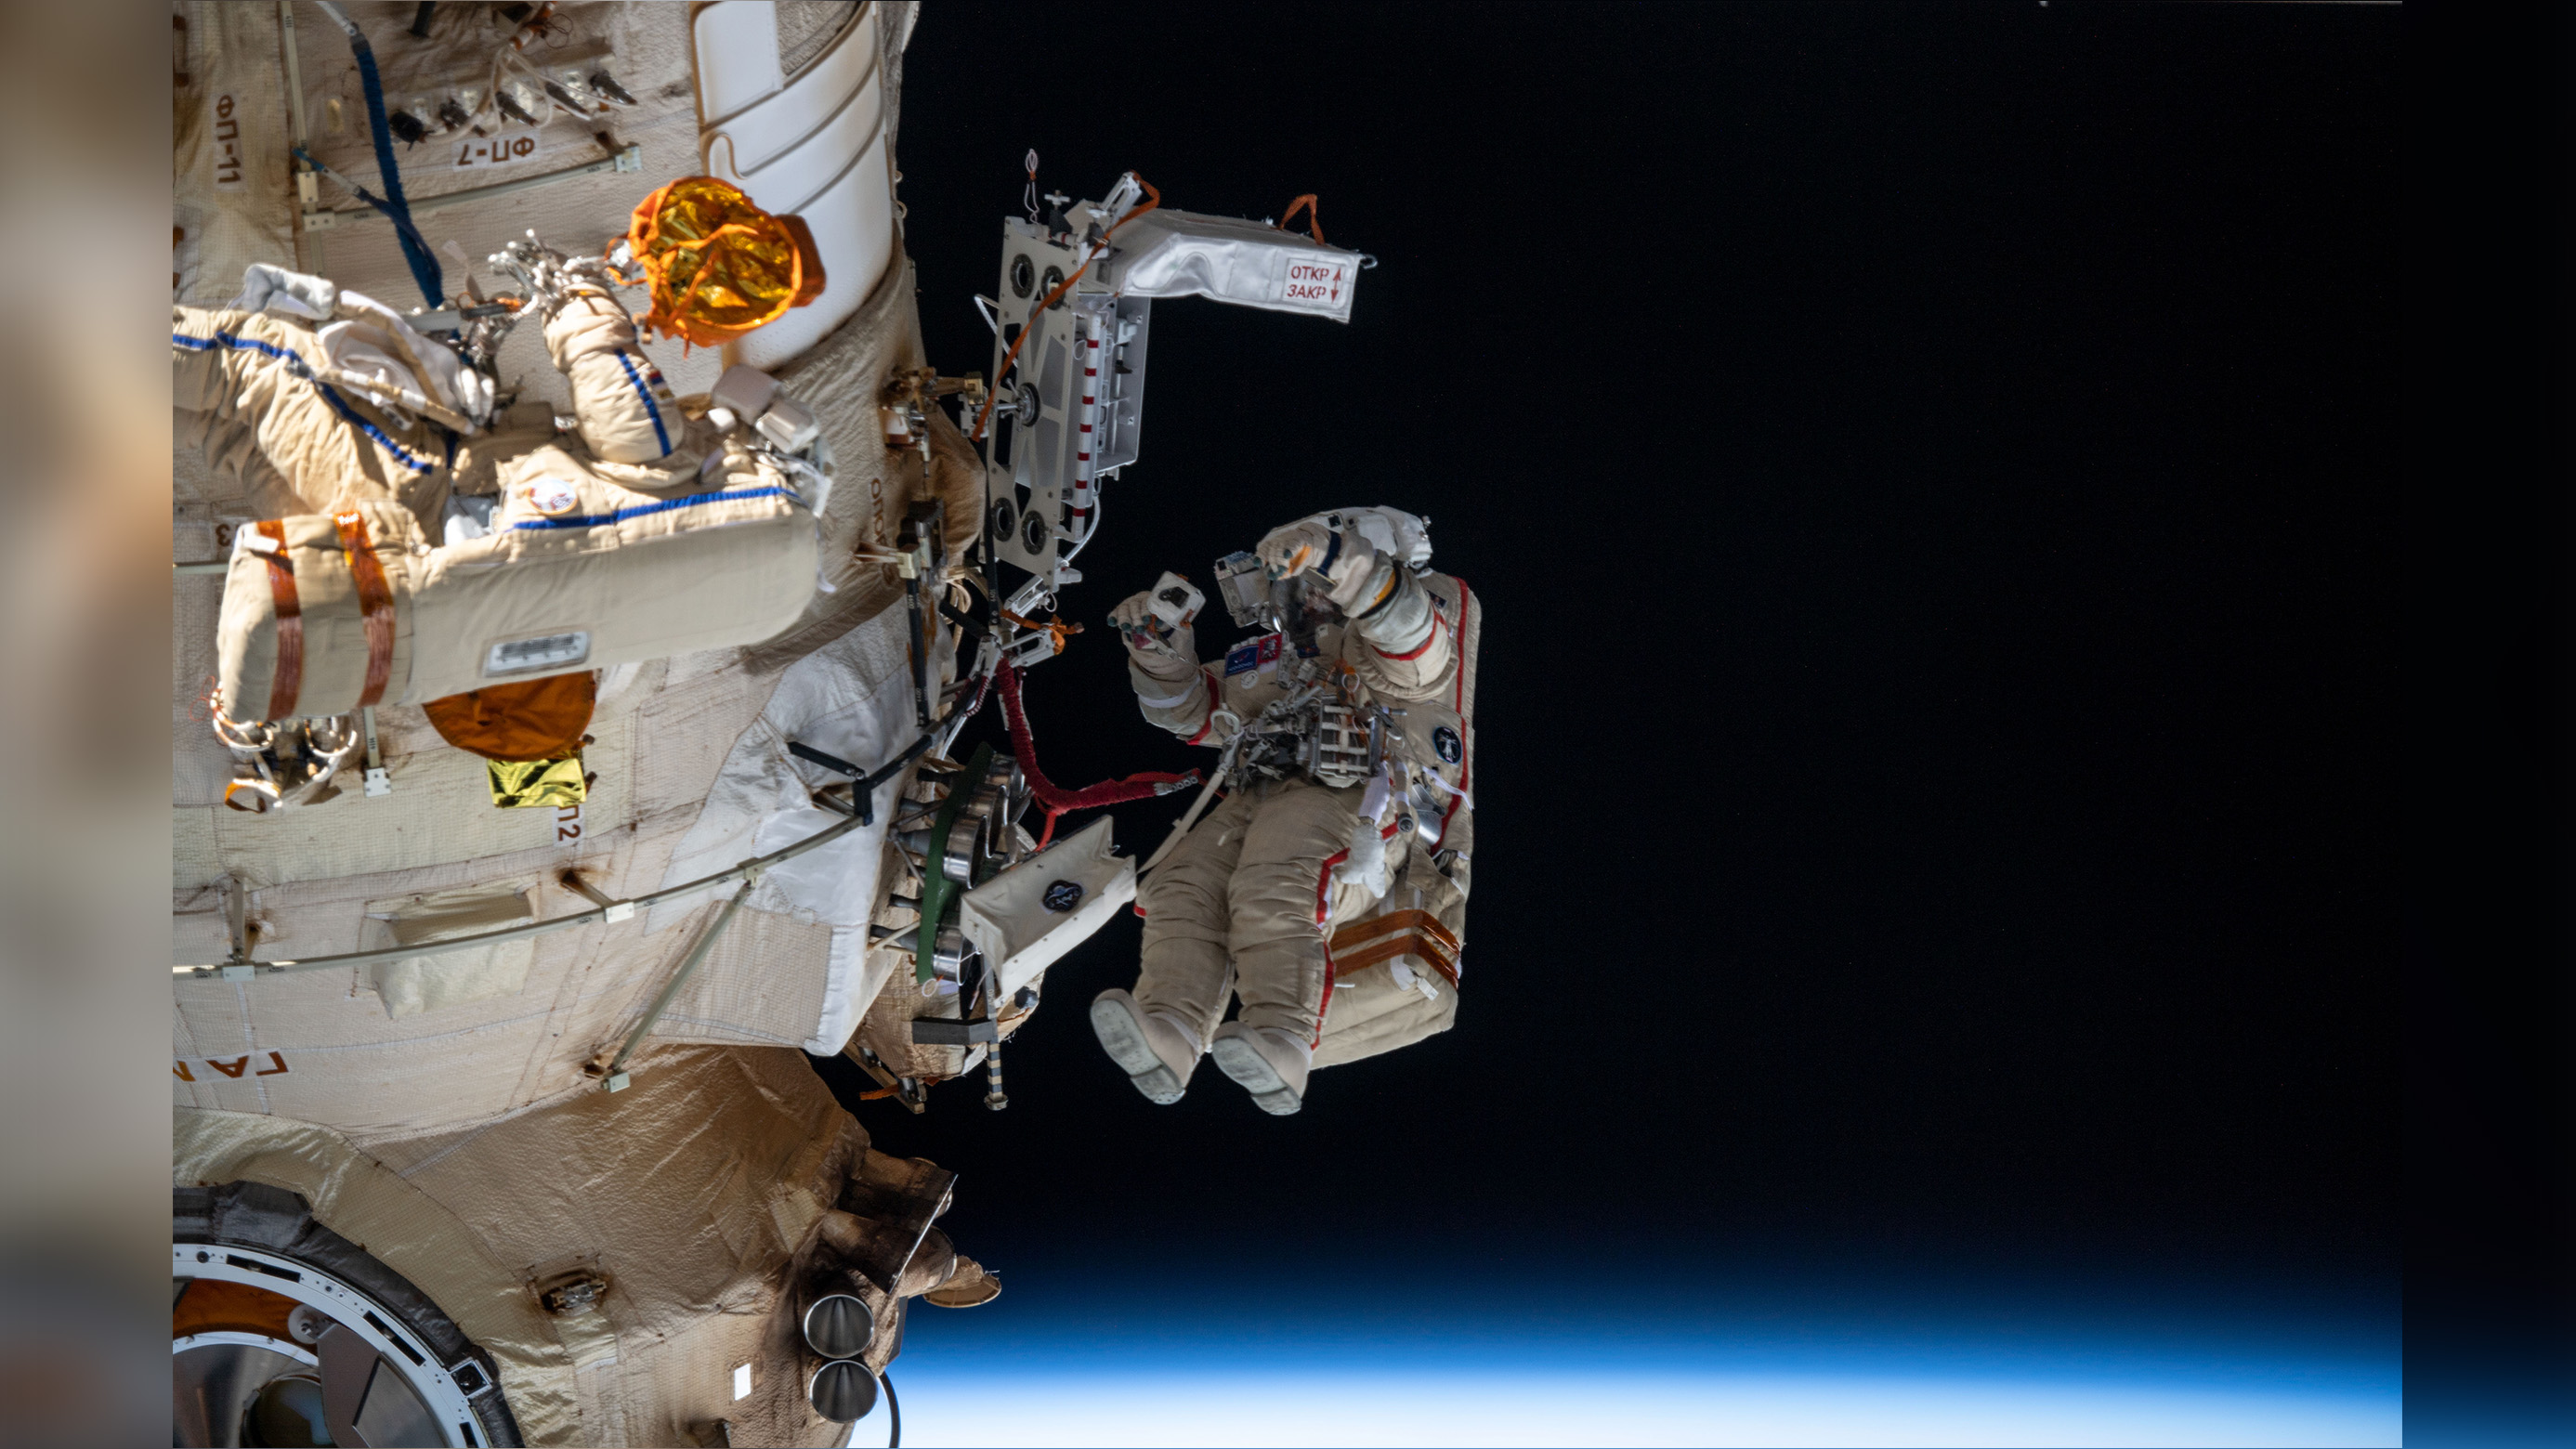 Russia will pull out of the International Space Station, space agency chief confirms thumbnail